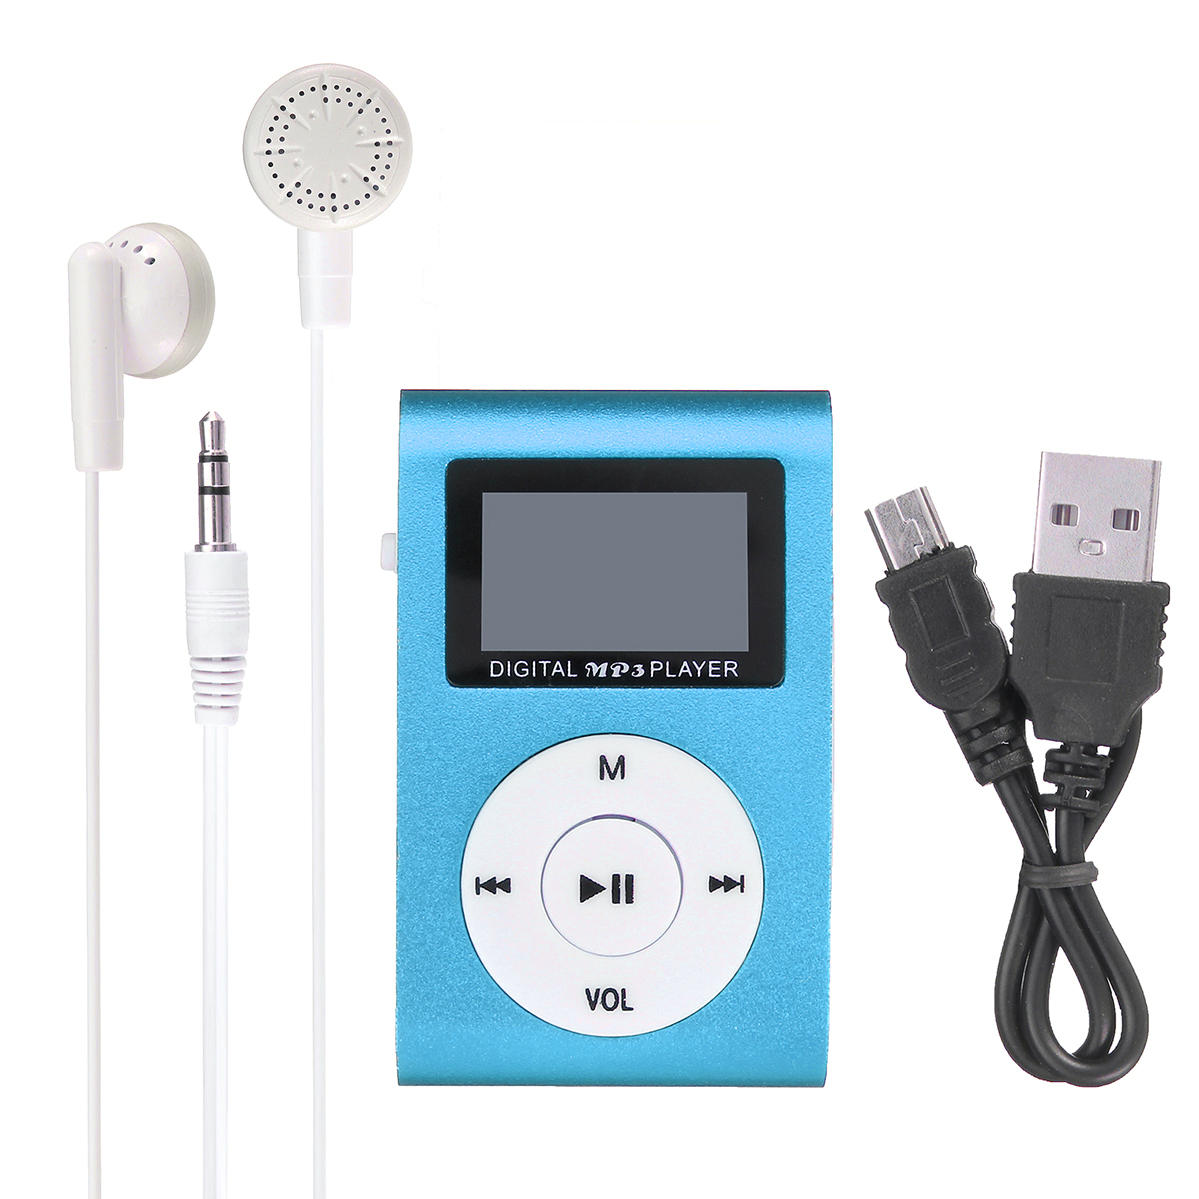 MP3 Player USB Clip 32GB Micro SD Card Slot with Earphone